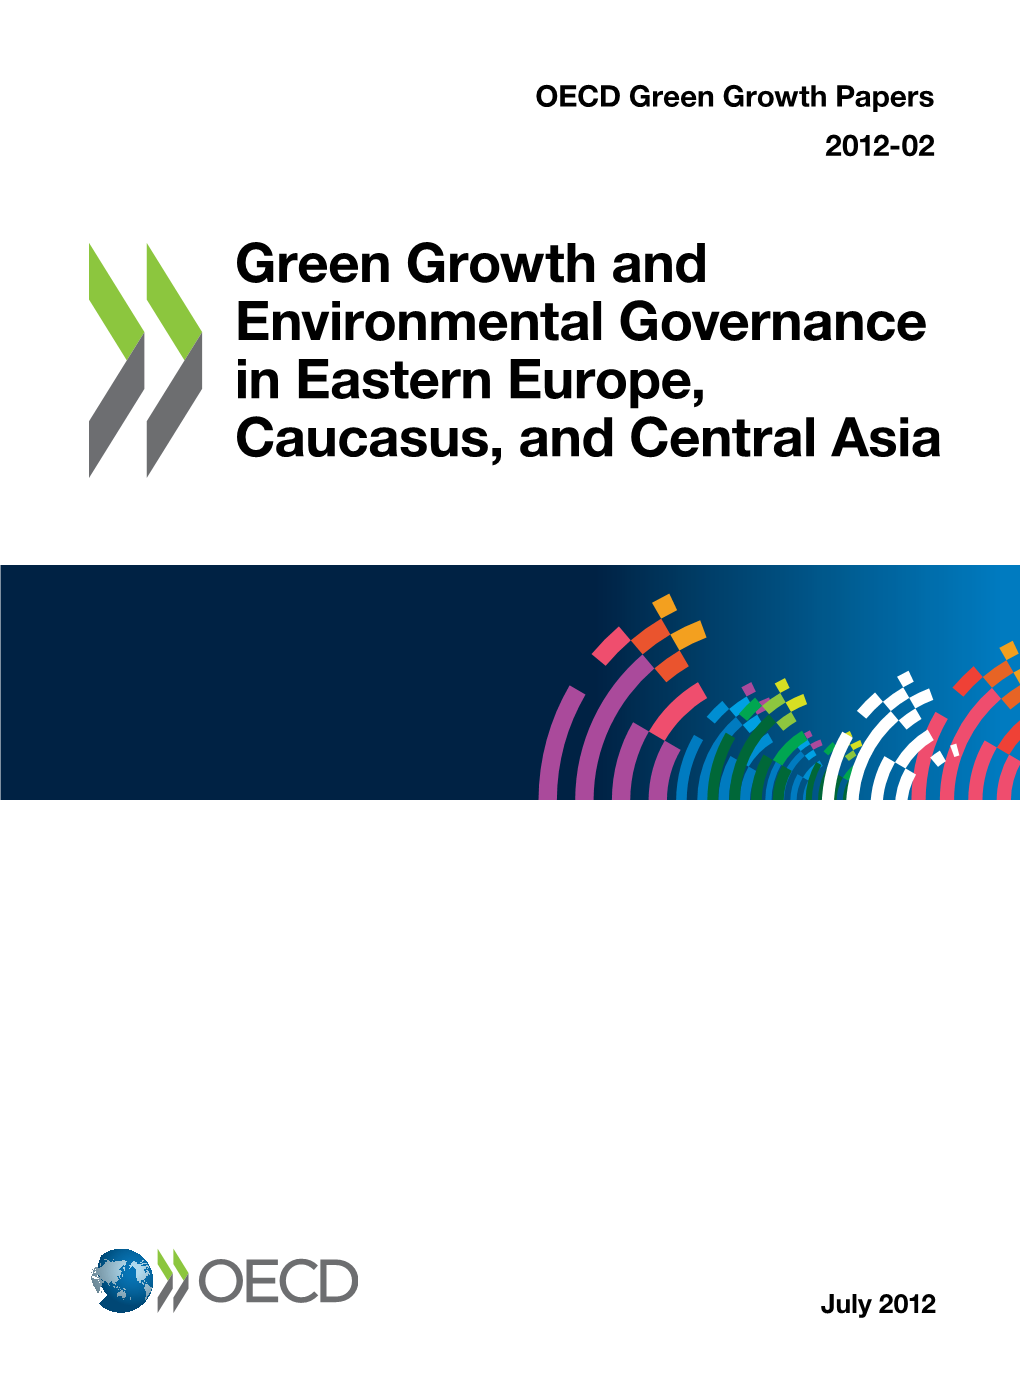 Green Growth and Environmental Governance in Eastern Europe, Caucasus, and Central Asia